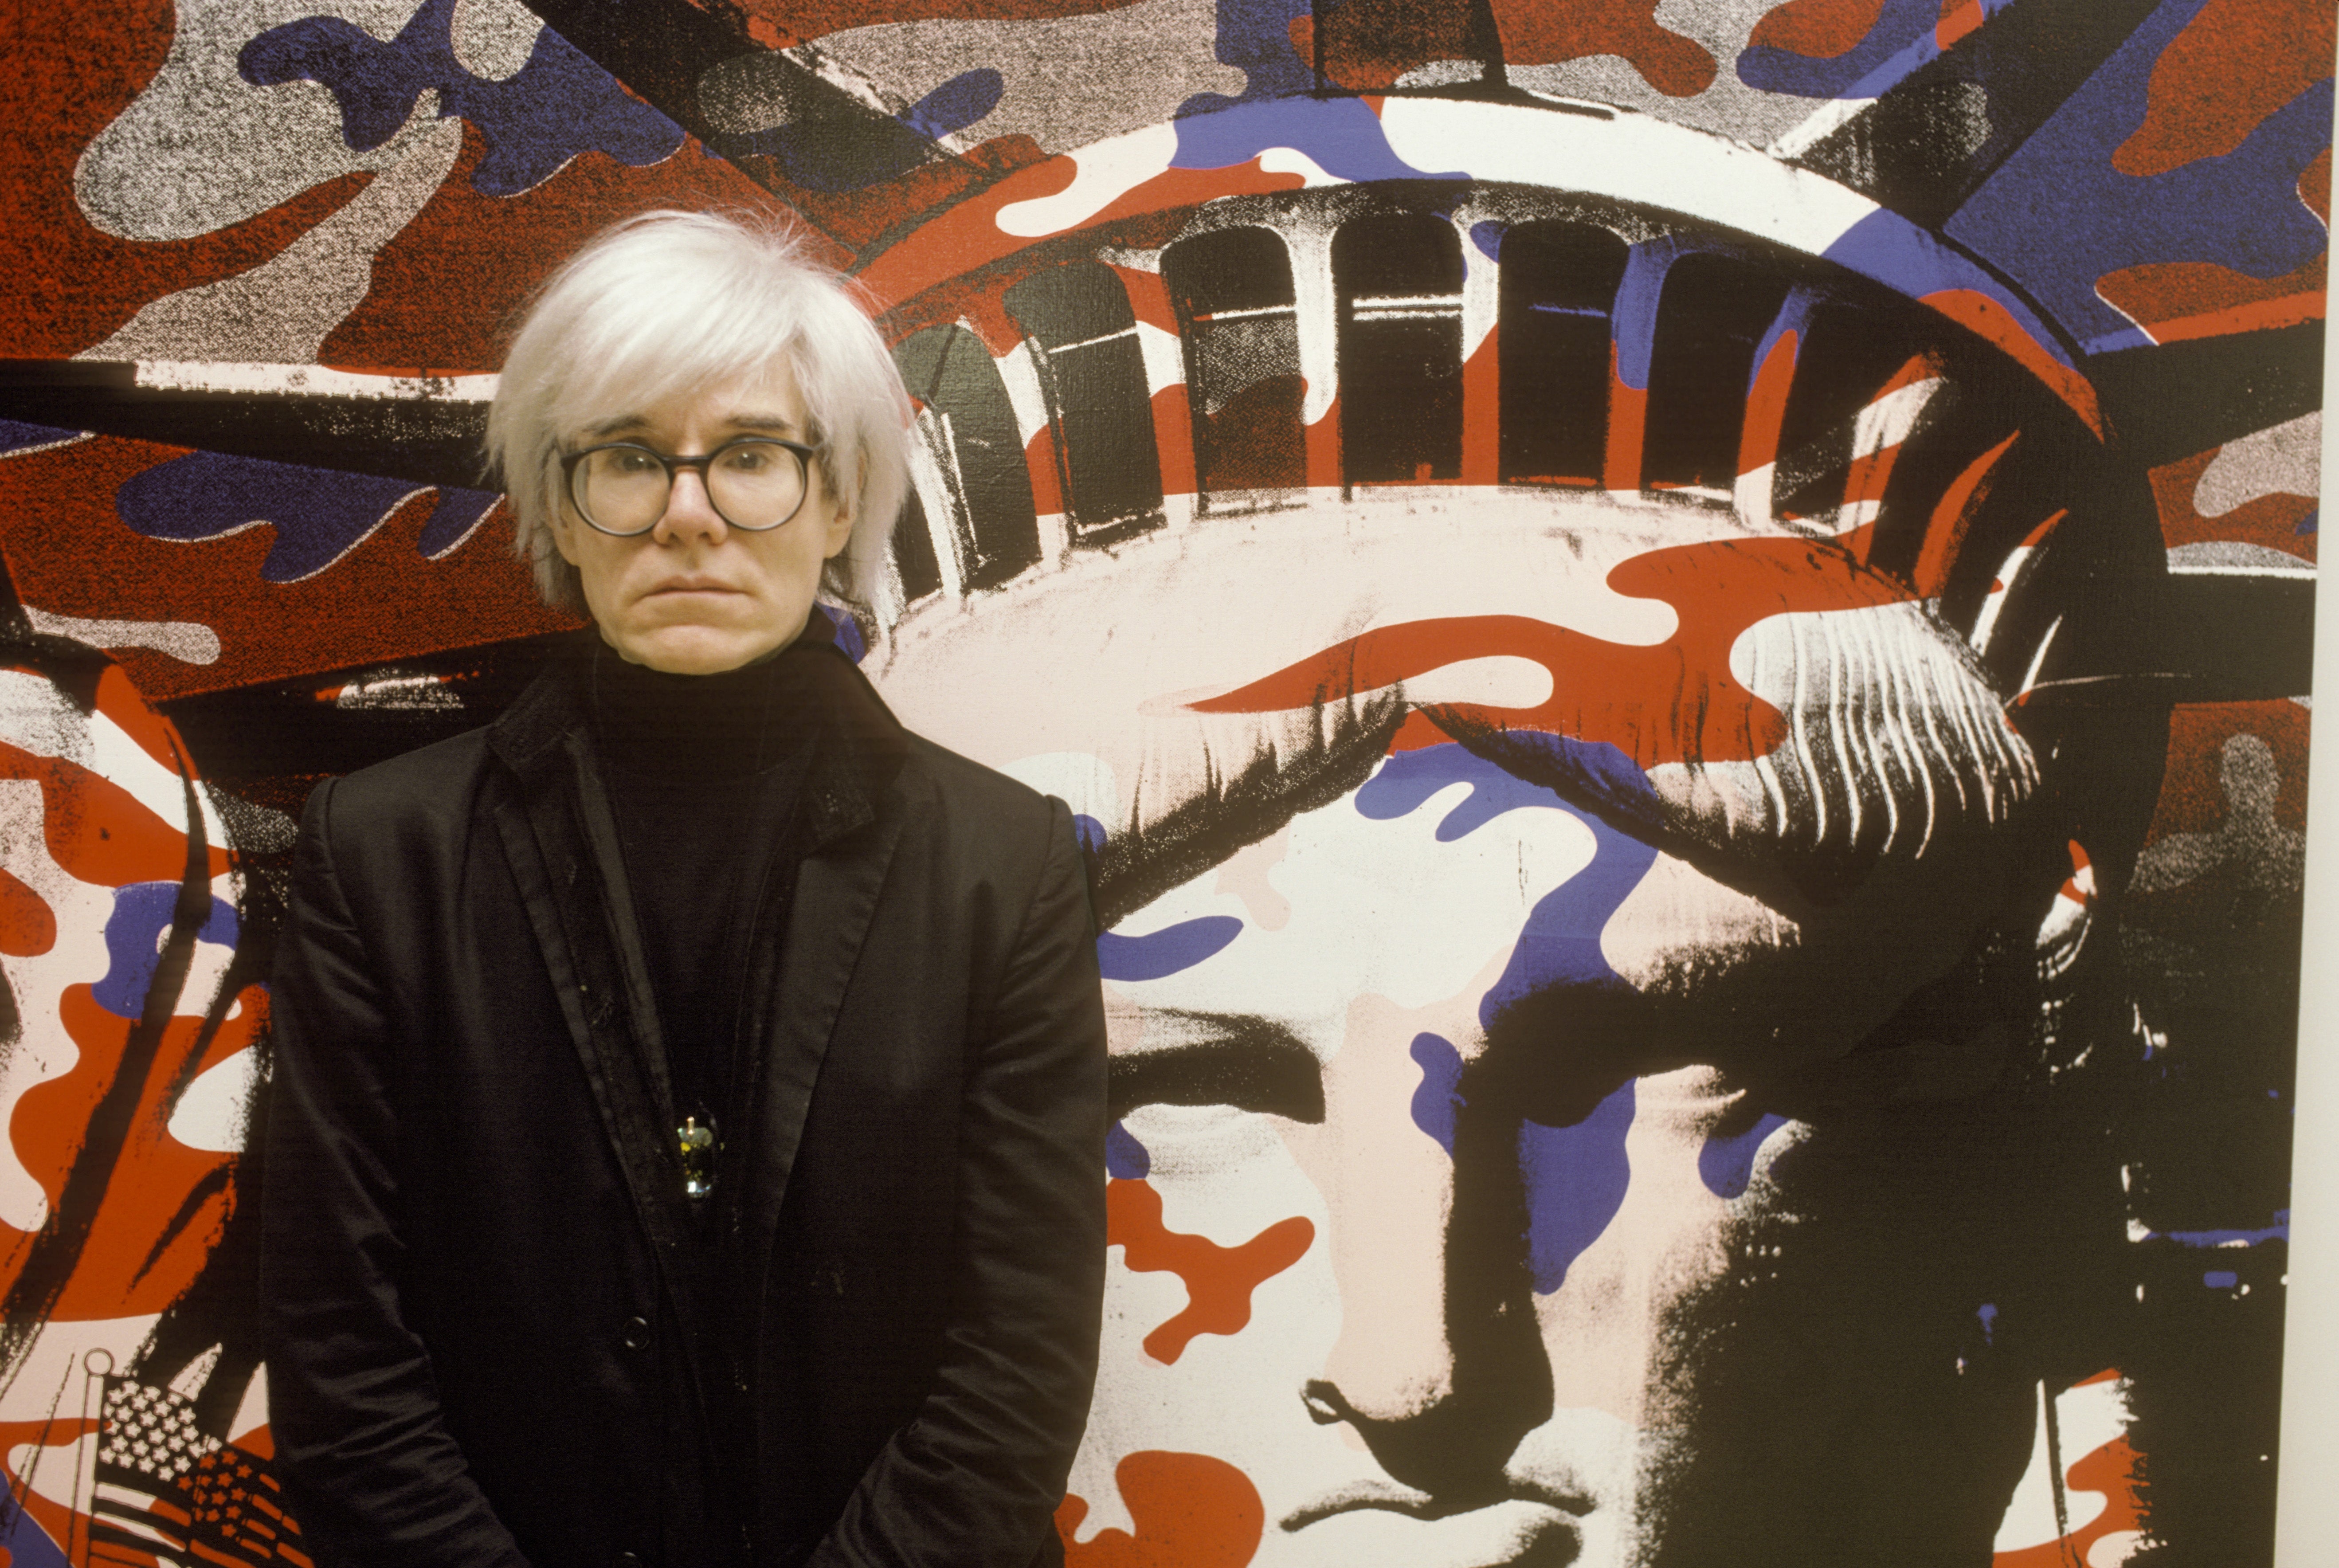 Andy Warhol's Life and Near-Death Experience in New York City 